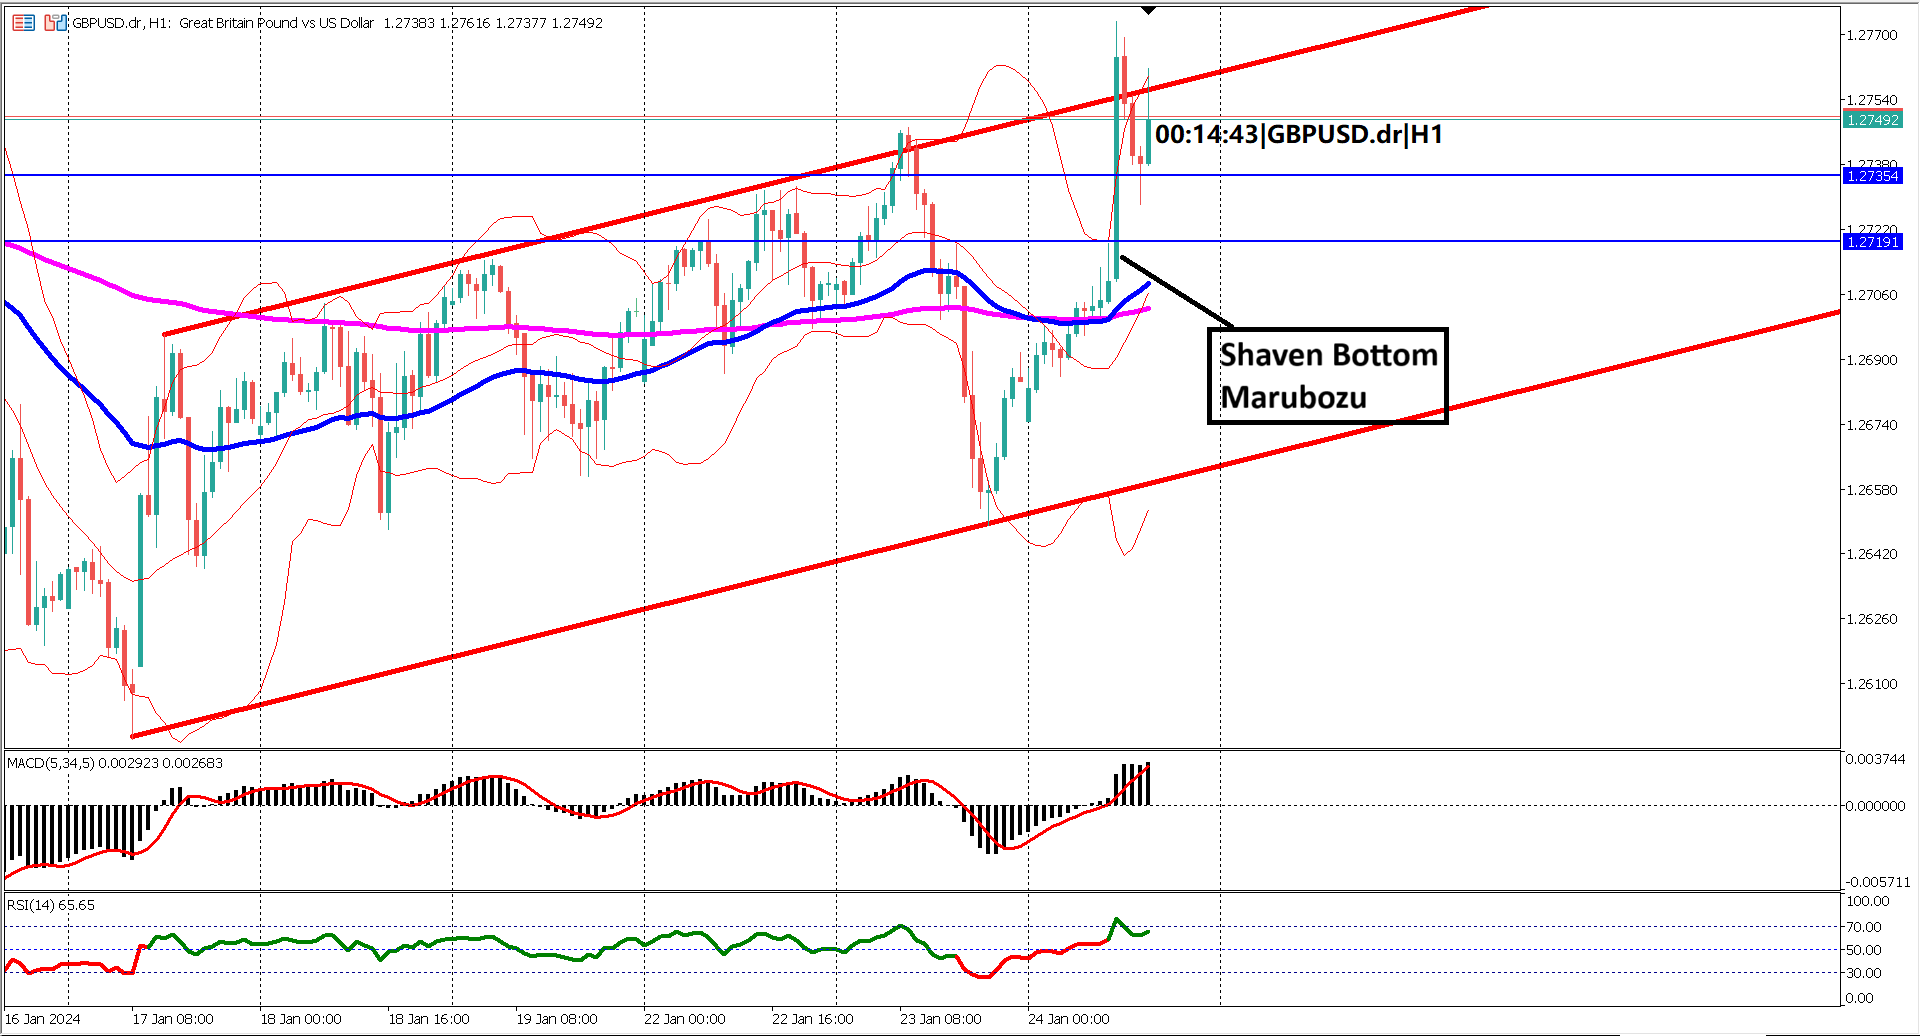 GBPUSD Price Action Unleashes Bullish Momentum - Ascending Channel Breakout Signals Potential Highs!